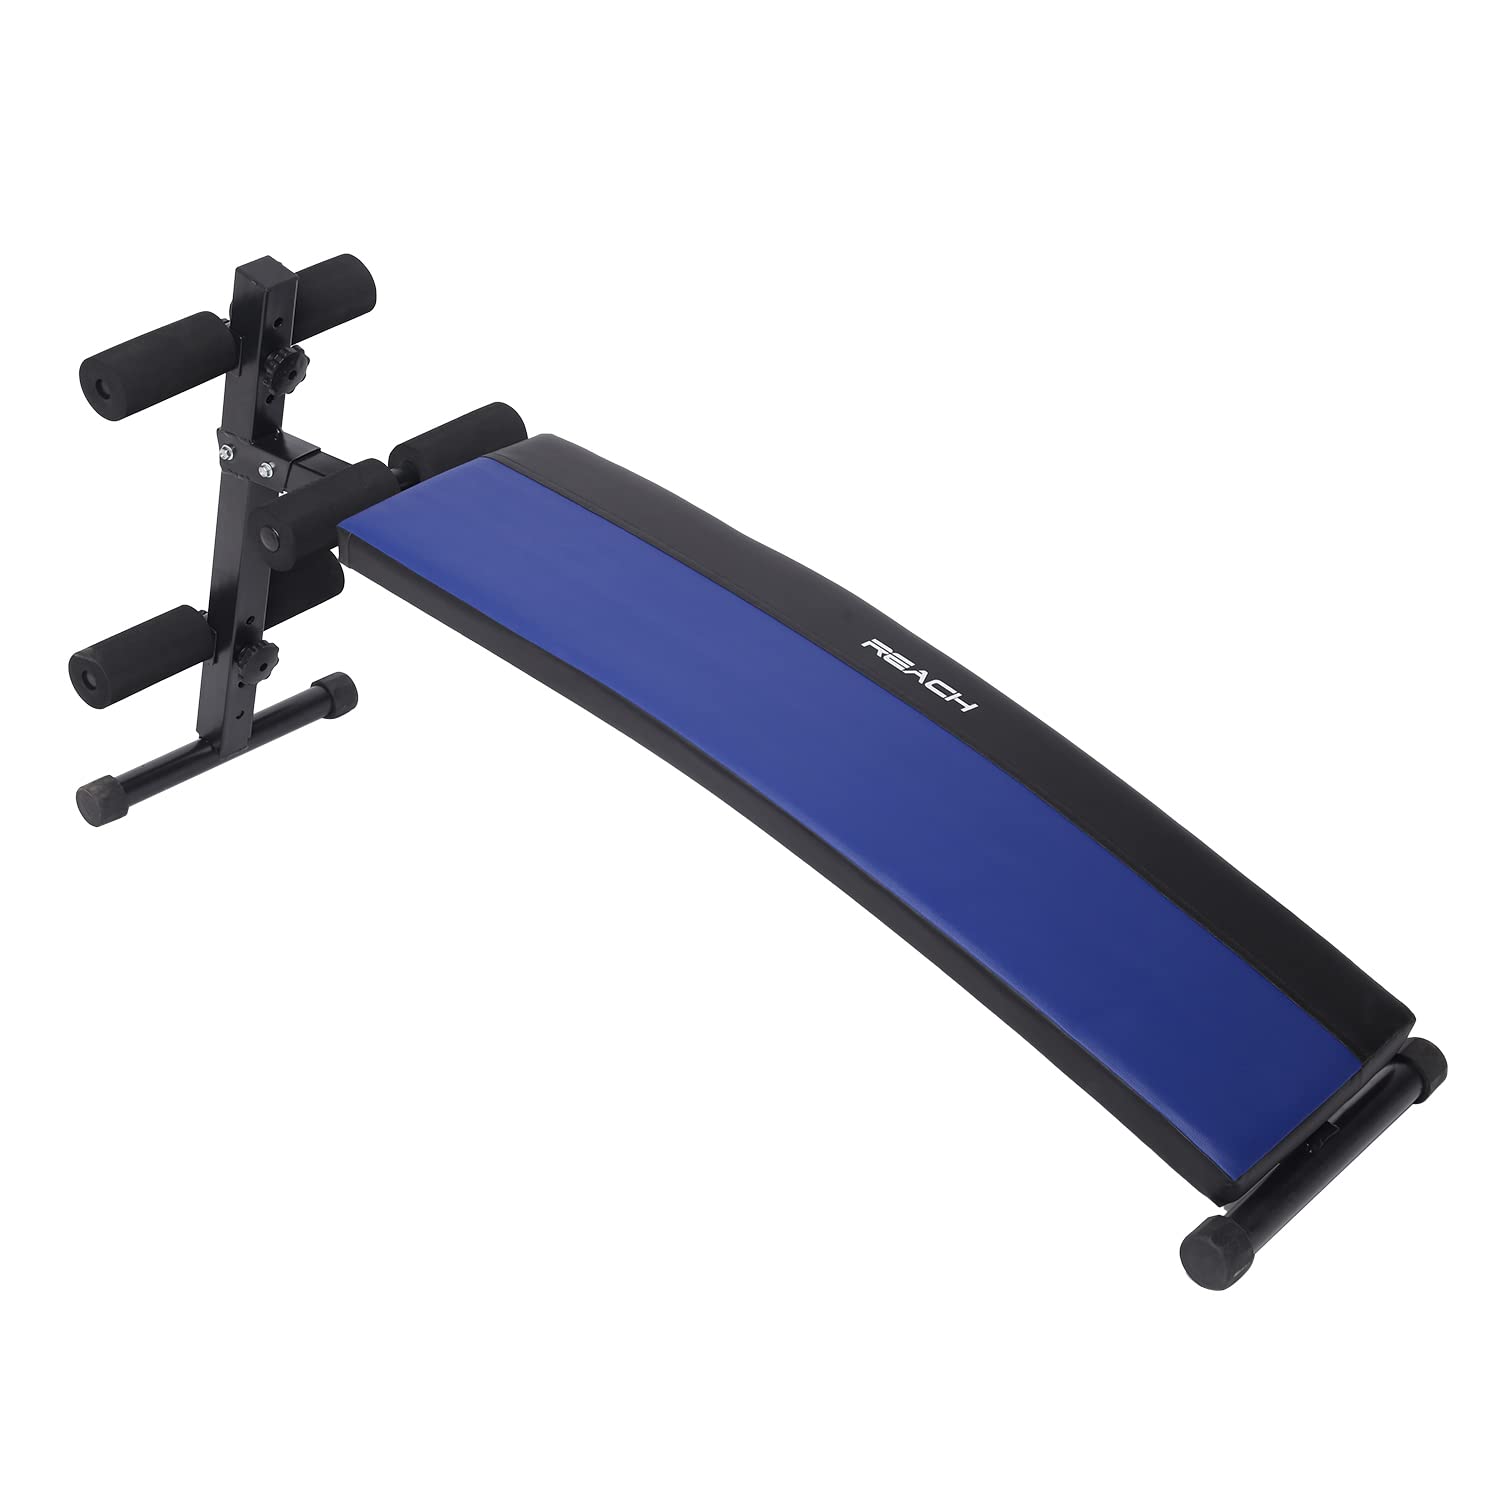 Reach Abdominal AB Cruncher Exercise Sit-Up Bench for Home Gym